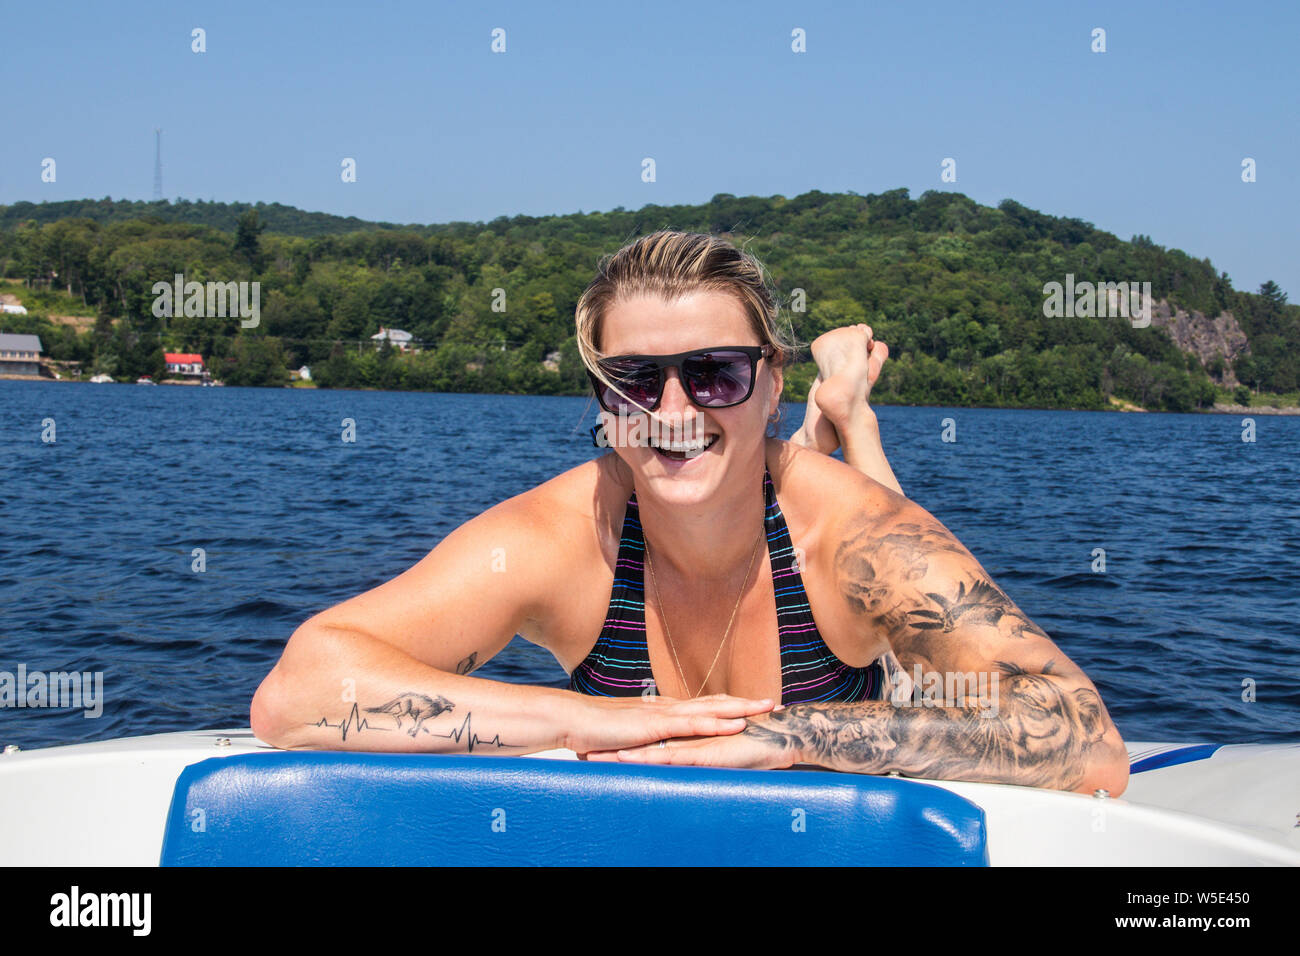 Blond caucasian woman sunbathing on a boat deck on a lake at summer Stock Photo